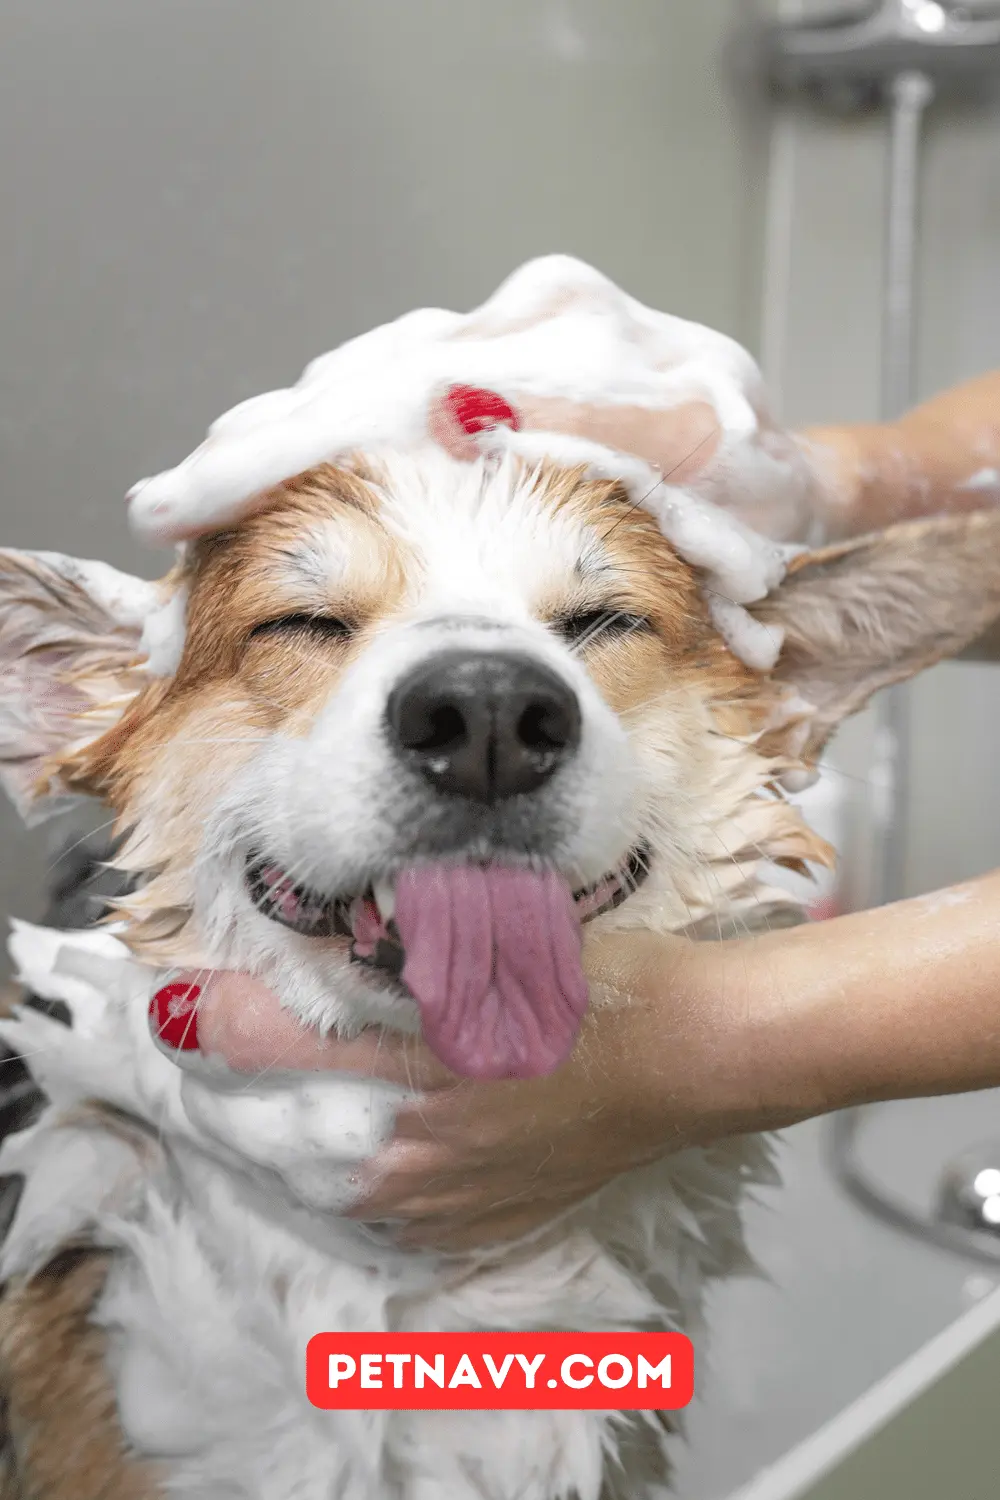 Dog Shampoo Recall: What Every Pet Owner Needs to Know